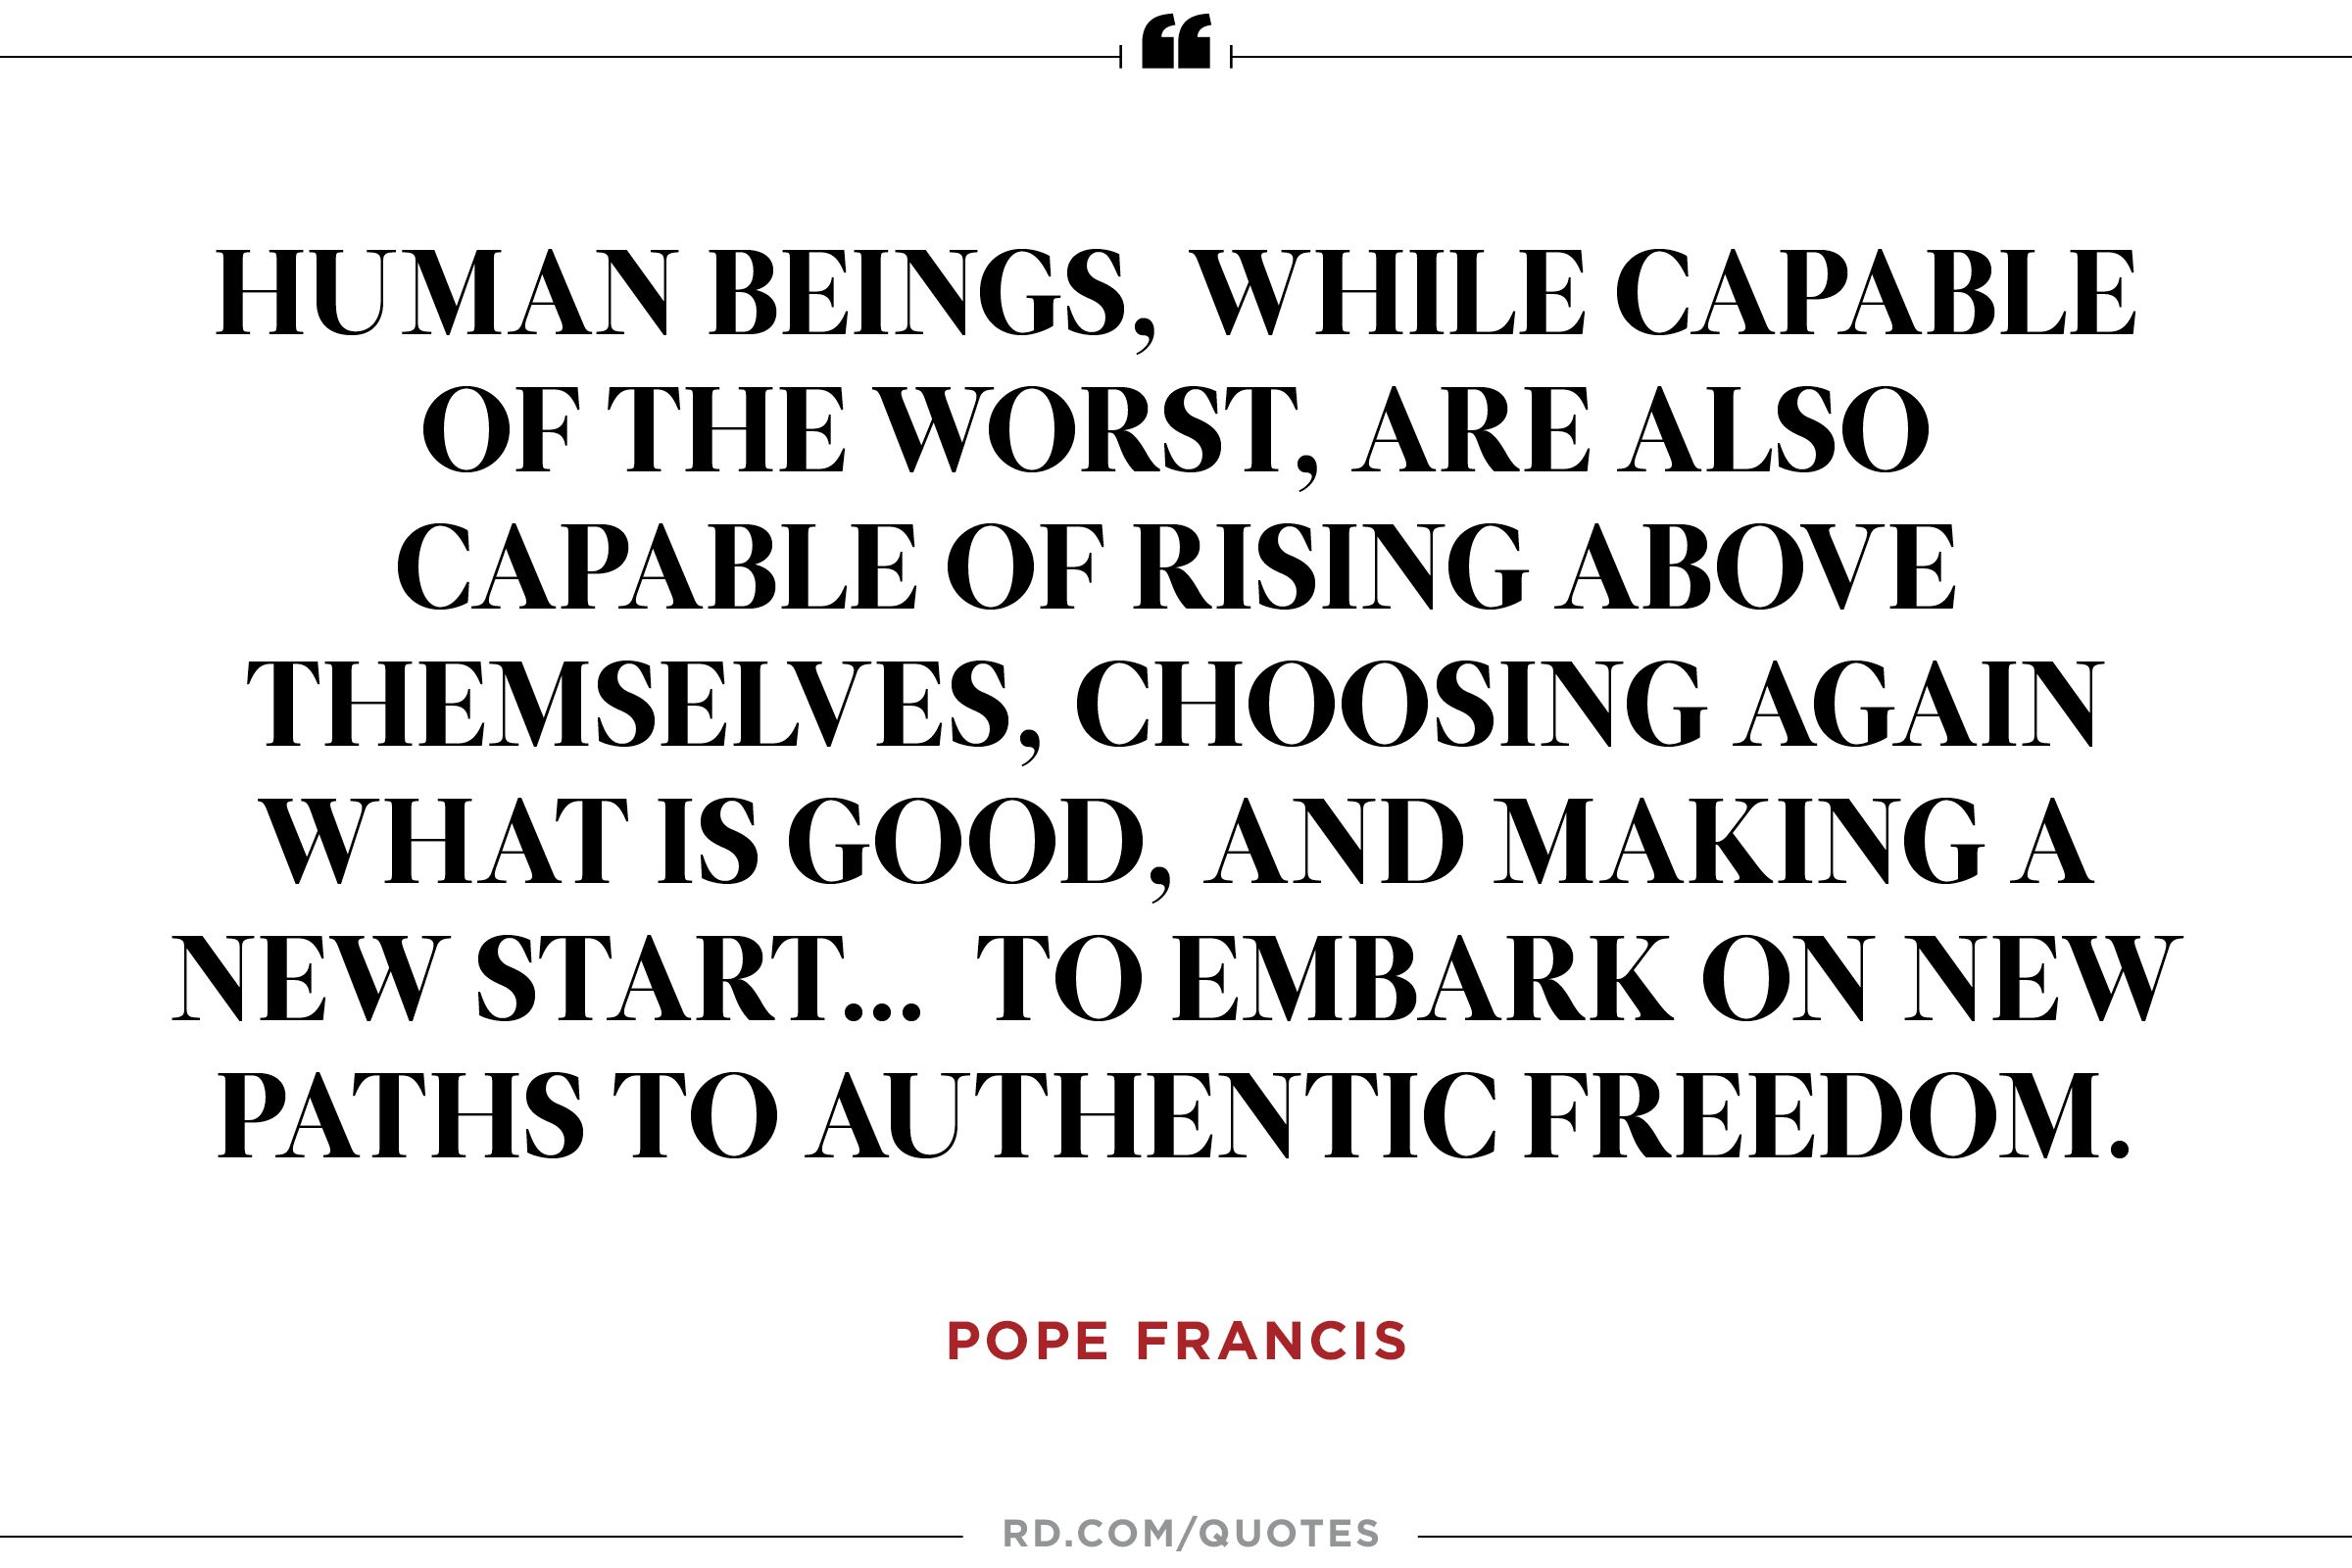 https://www.rd.com/wp-content/uploads/2016/03/08-pope-francis-quotes-human-beings.jpg